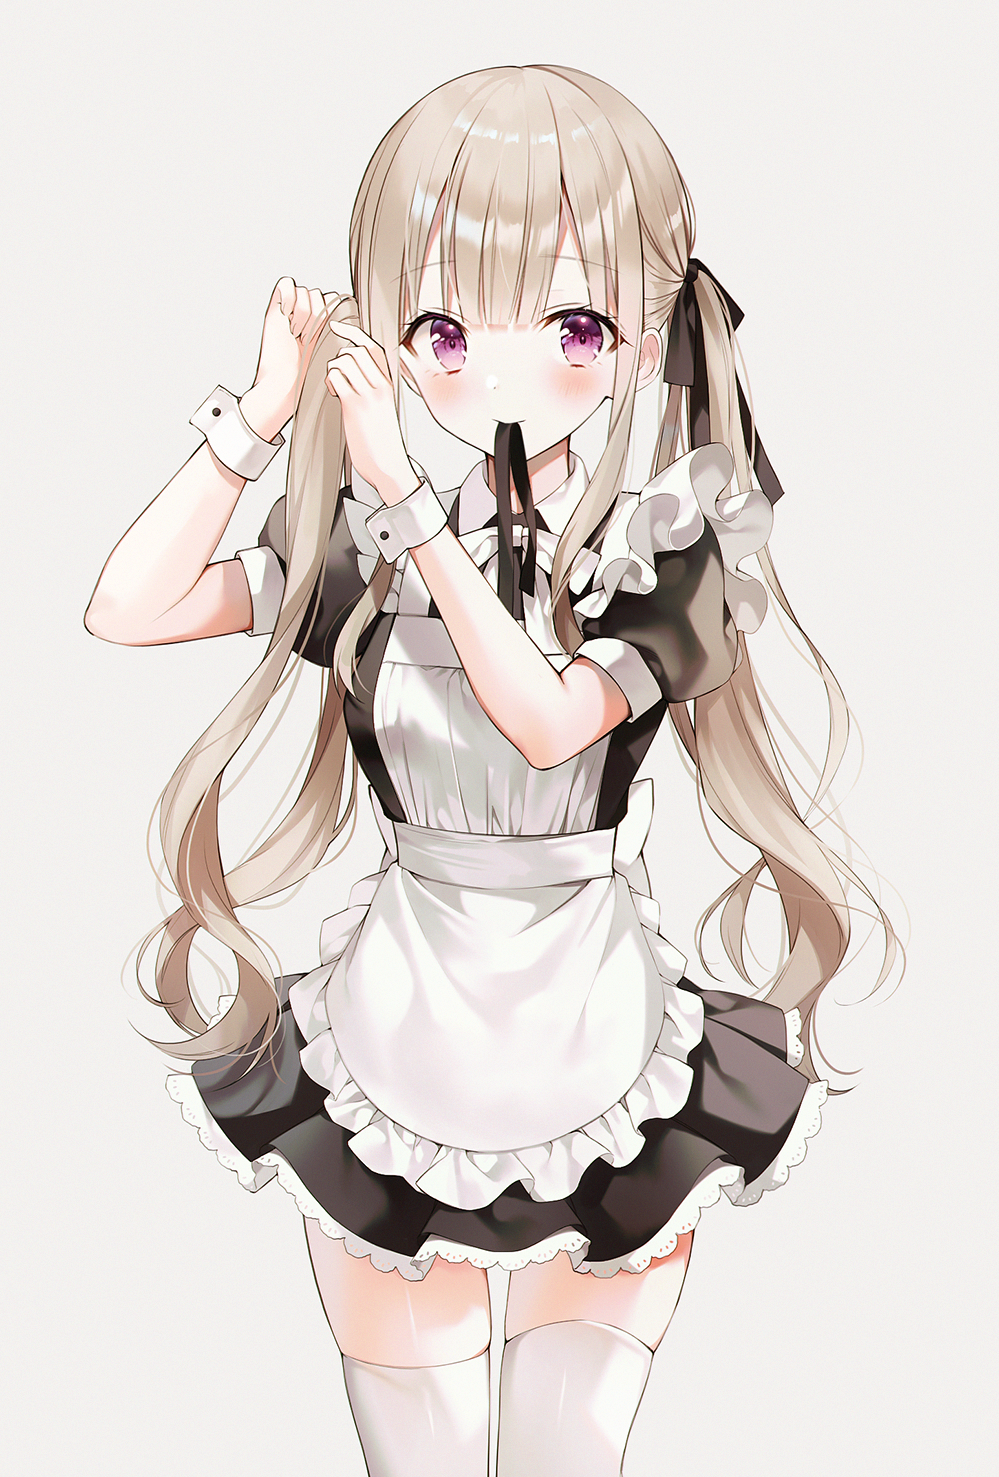 Anime 999x1477 anime anime girls maid maid outfit white background simple background twintails ash blonde purple eyes thigh-highs artwork Weri